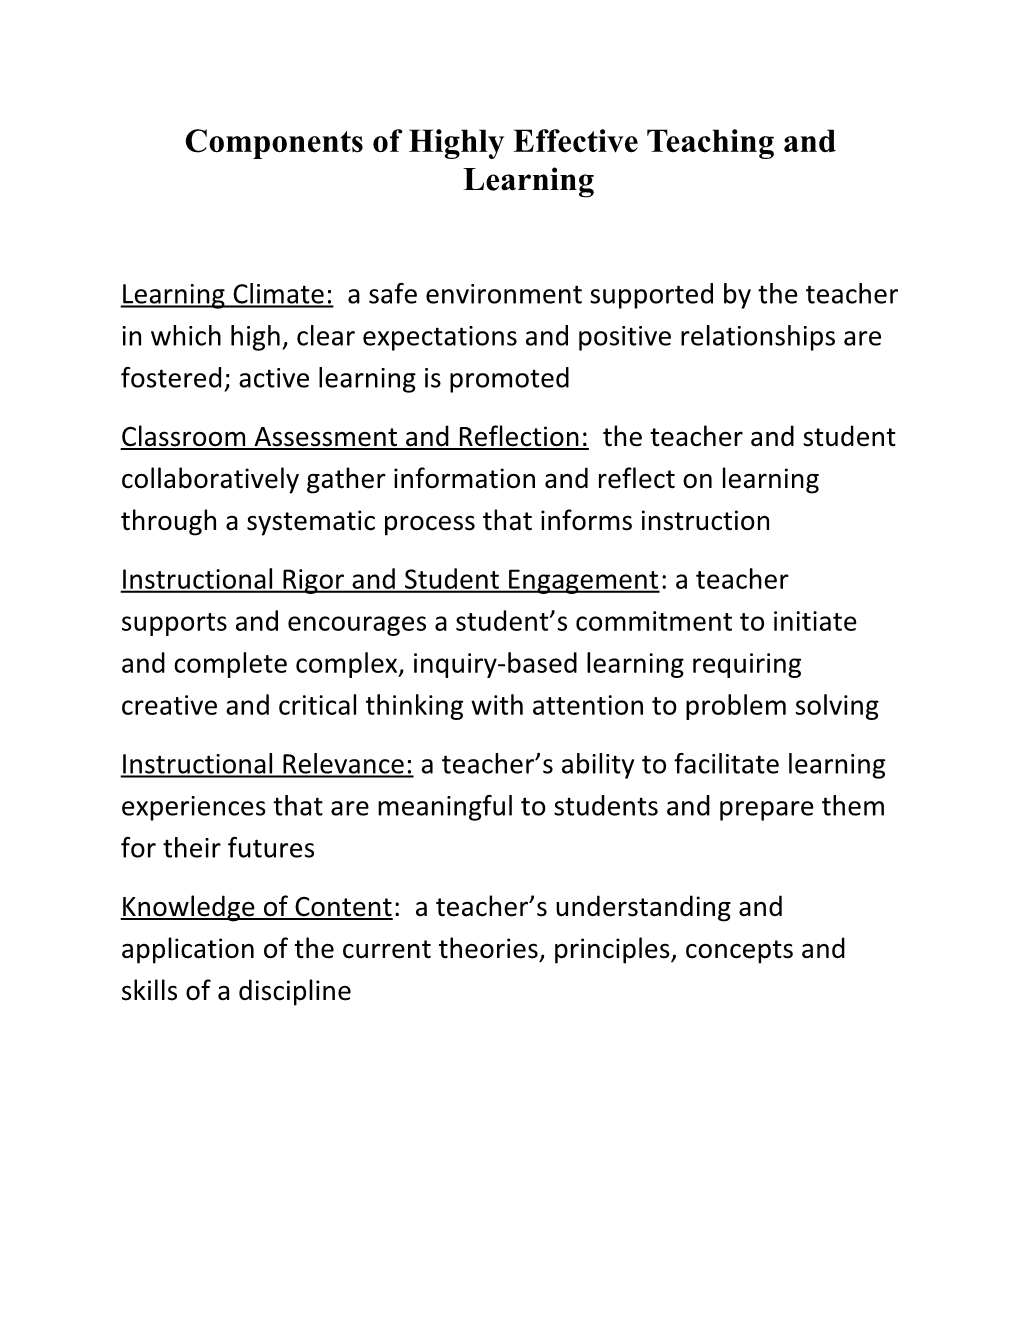 Components of Highly Effective Teaching and Learning